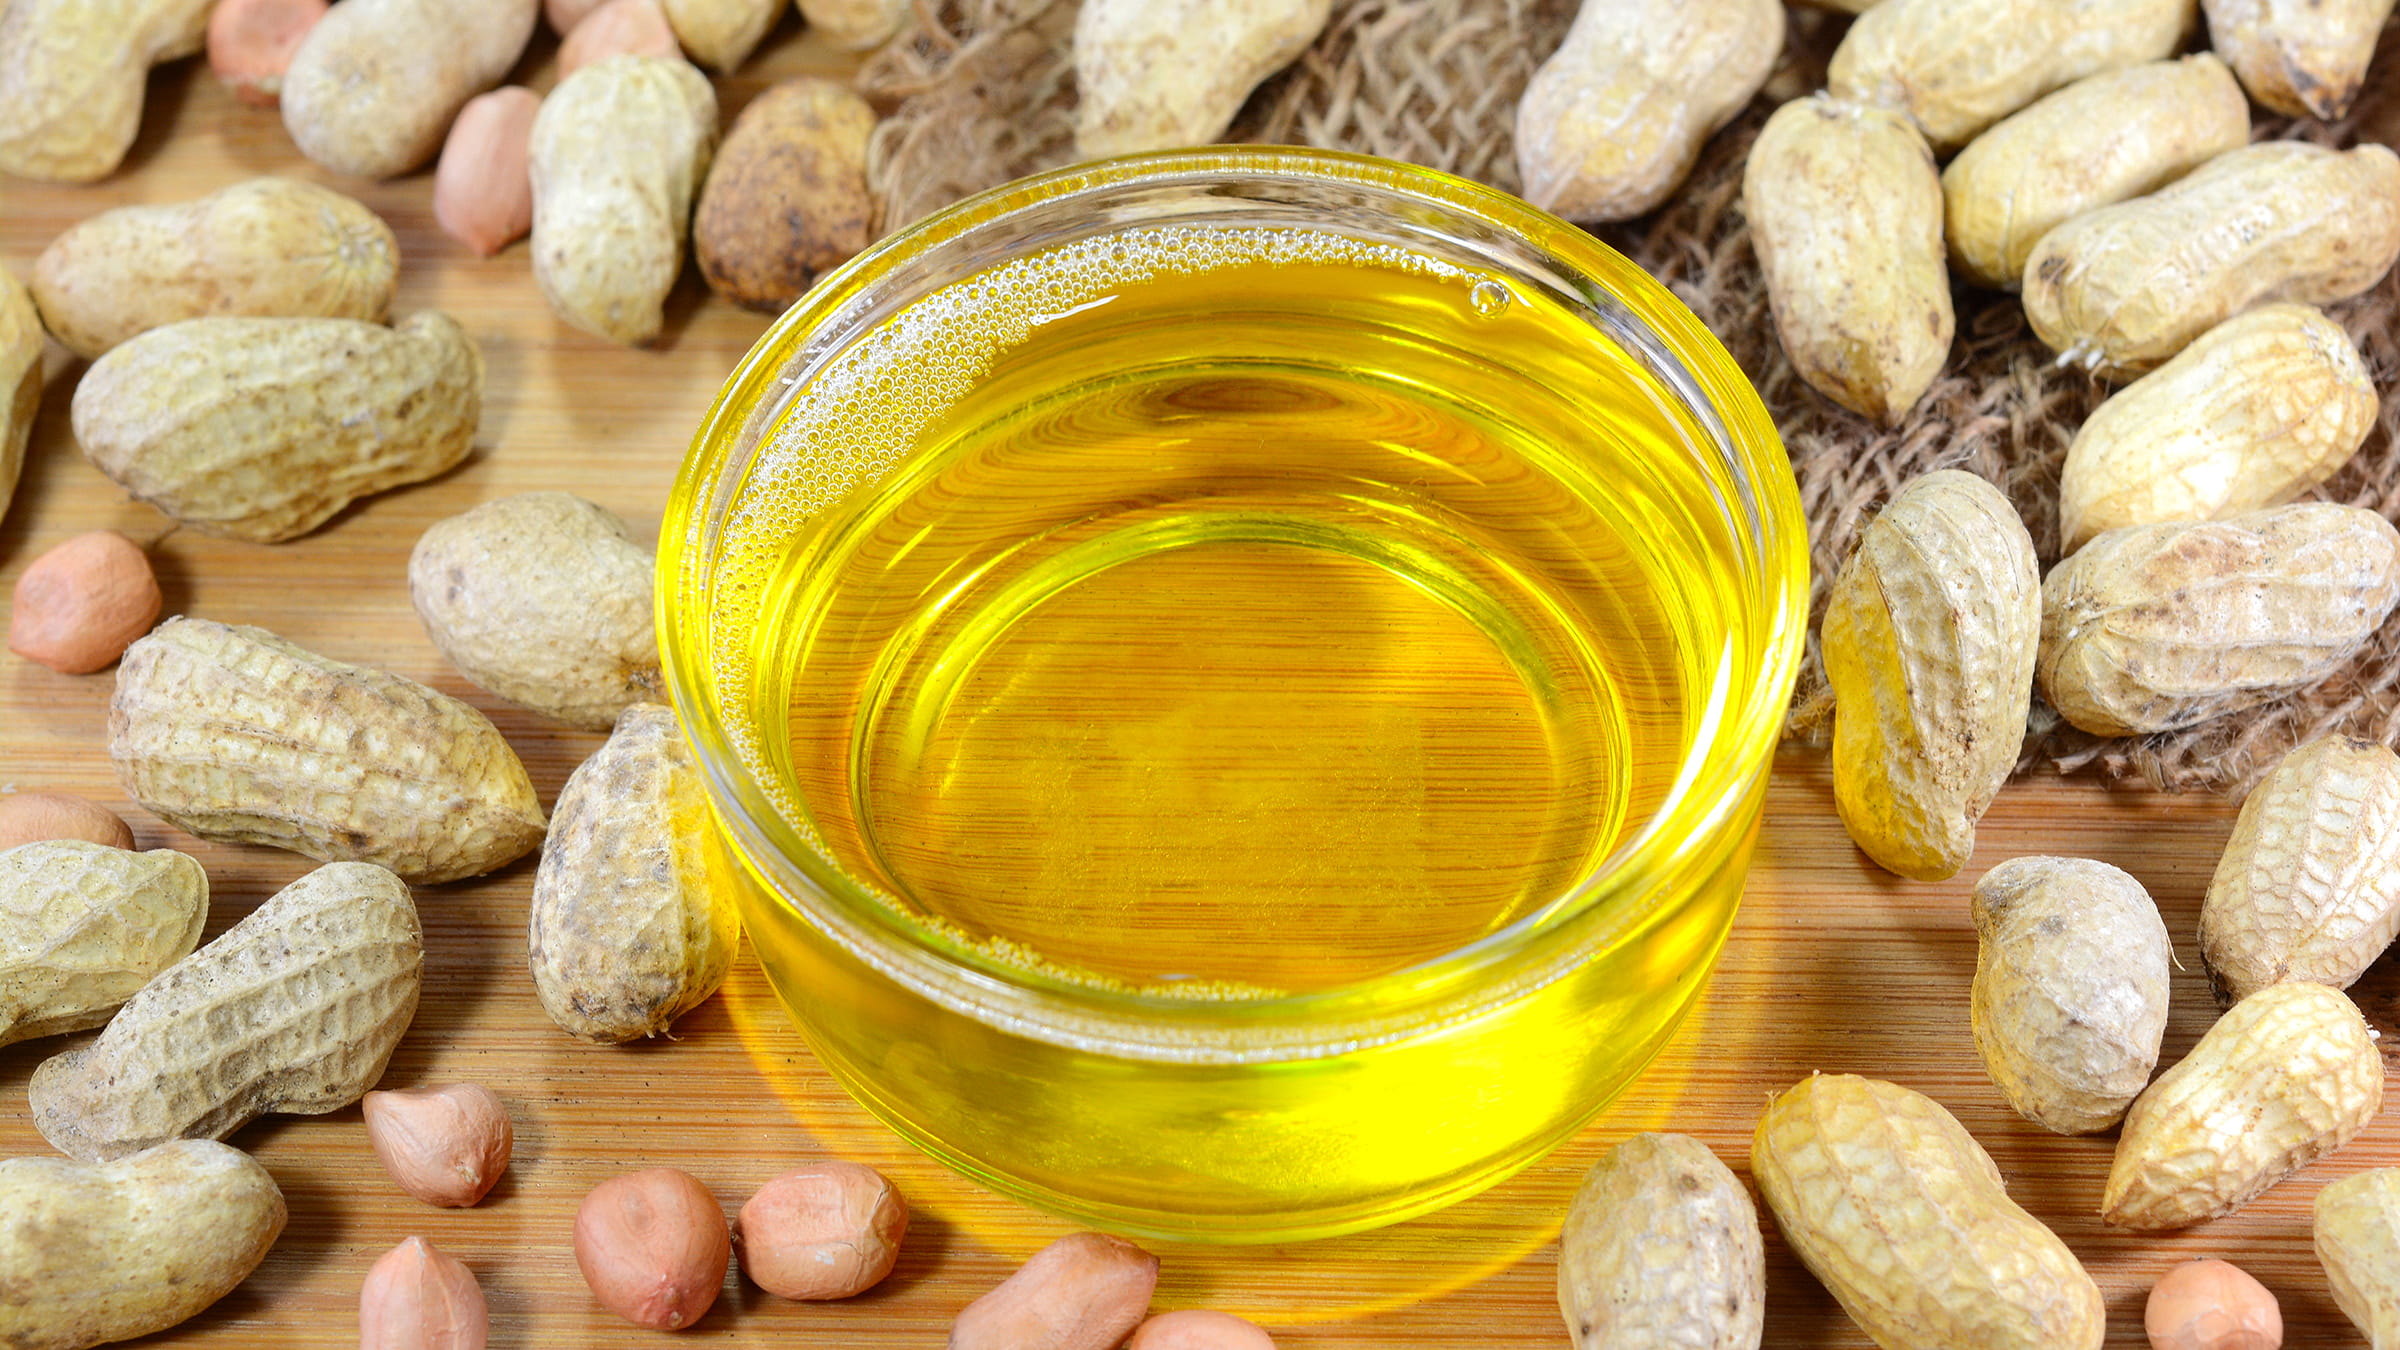 Can I eat at a restaurant that uses peanut oil if I have a peanut allergy? 